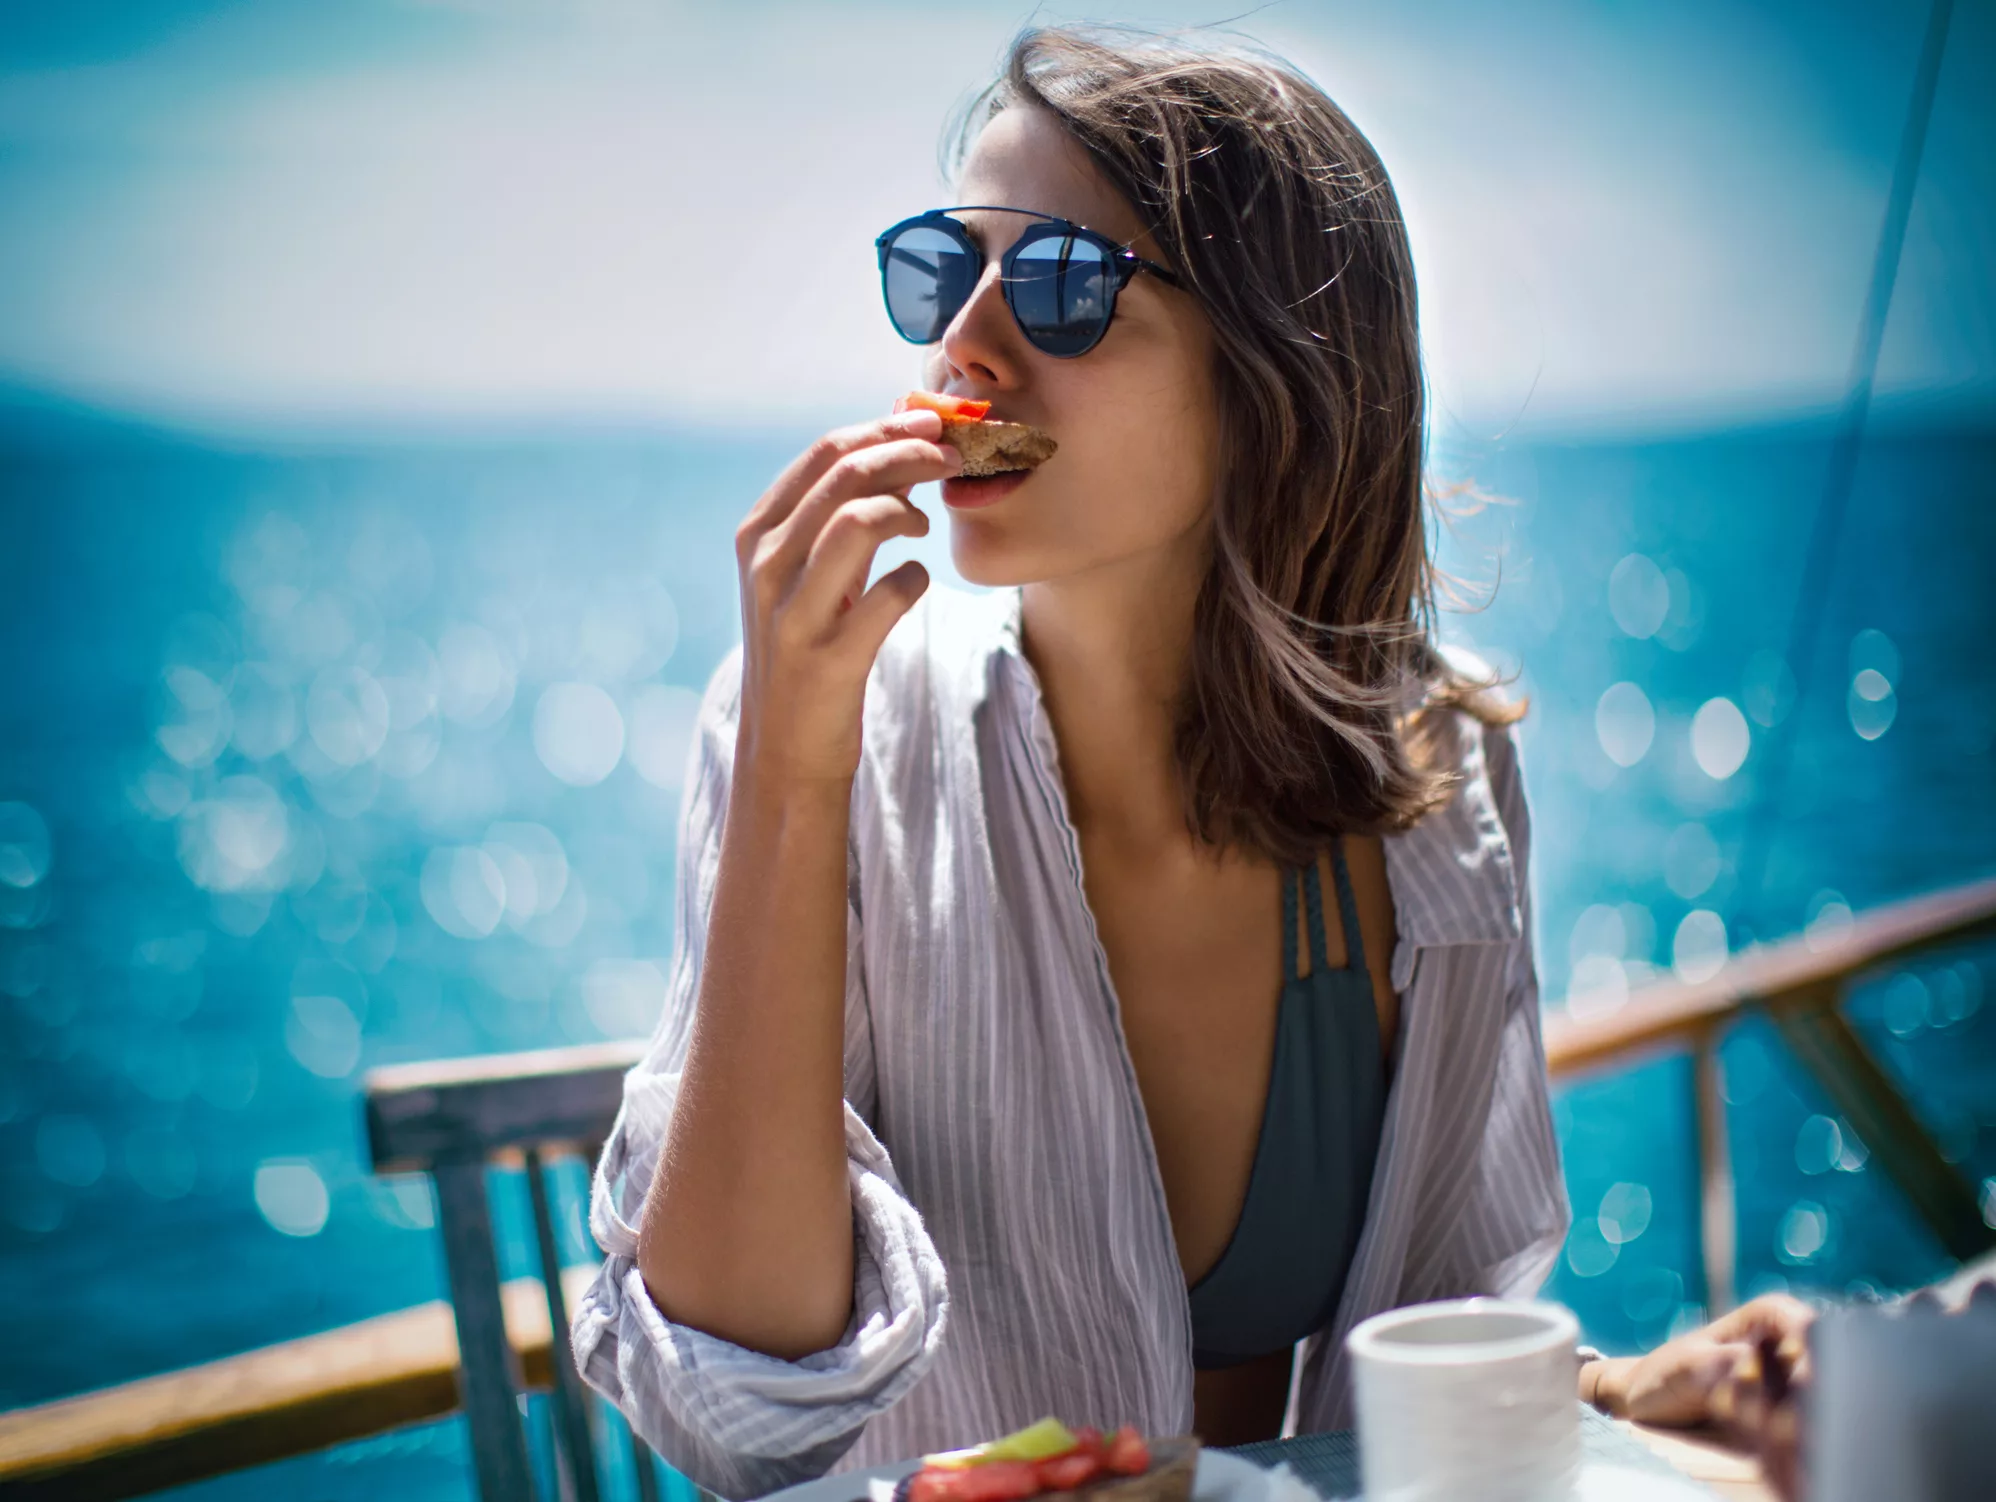 A female cruiser wearing sunglasses, enjoying delicious finger food on the deck of a Duoro River cruise ship